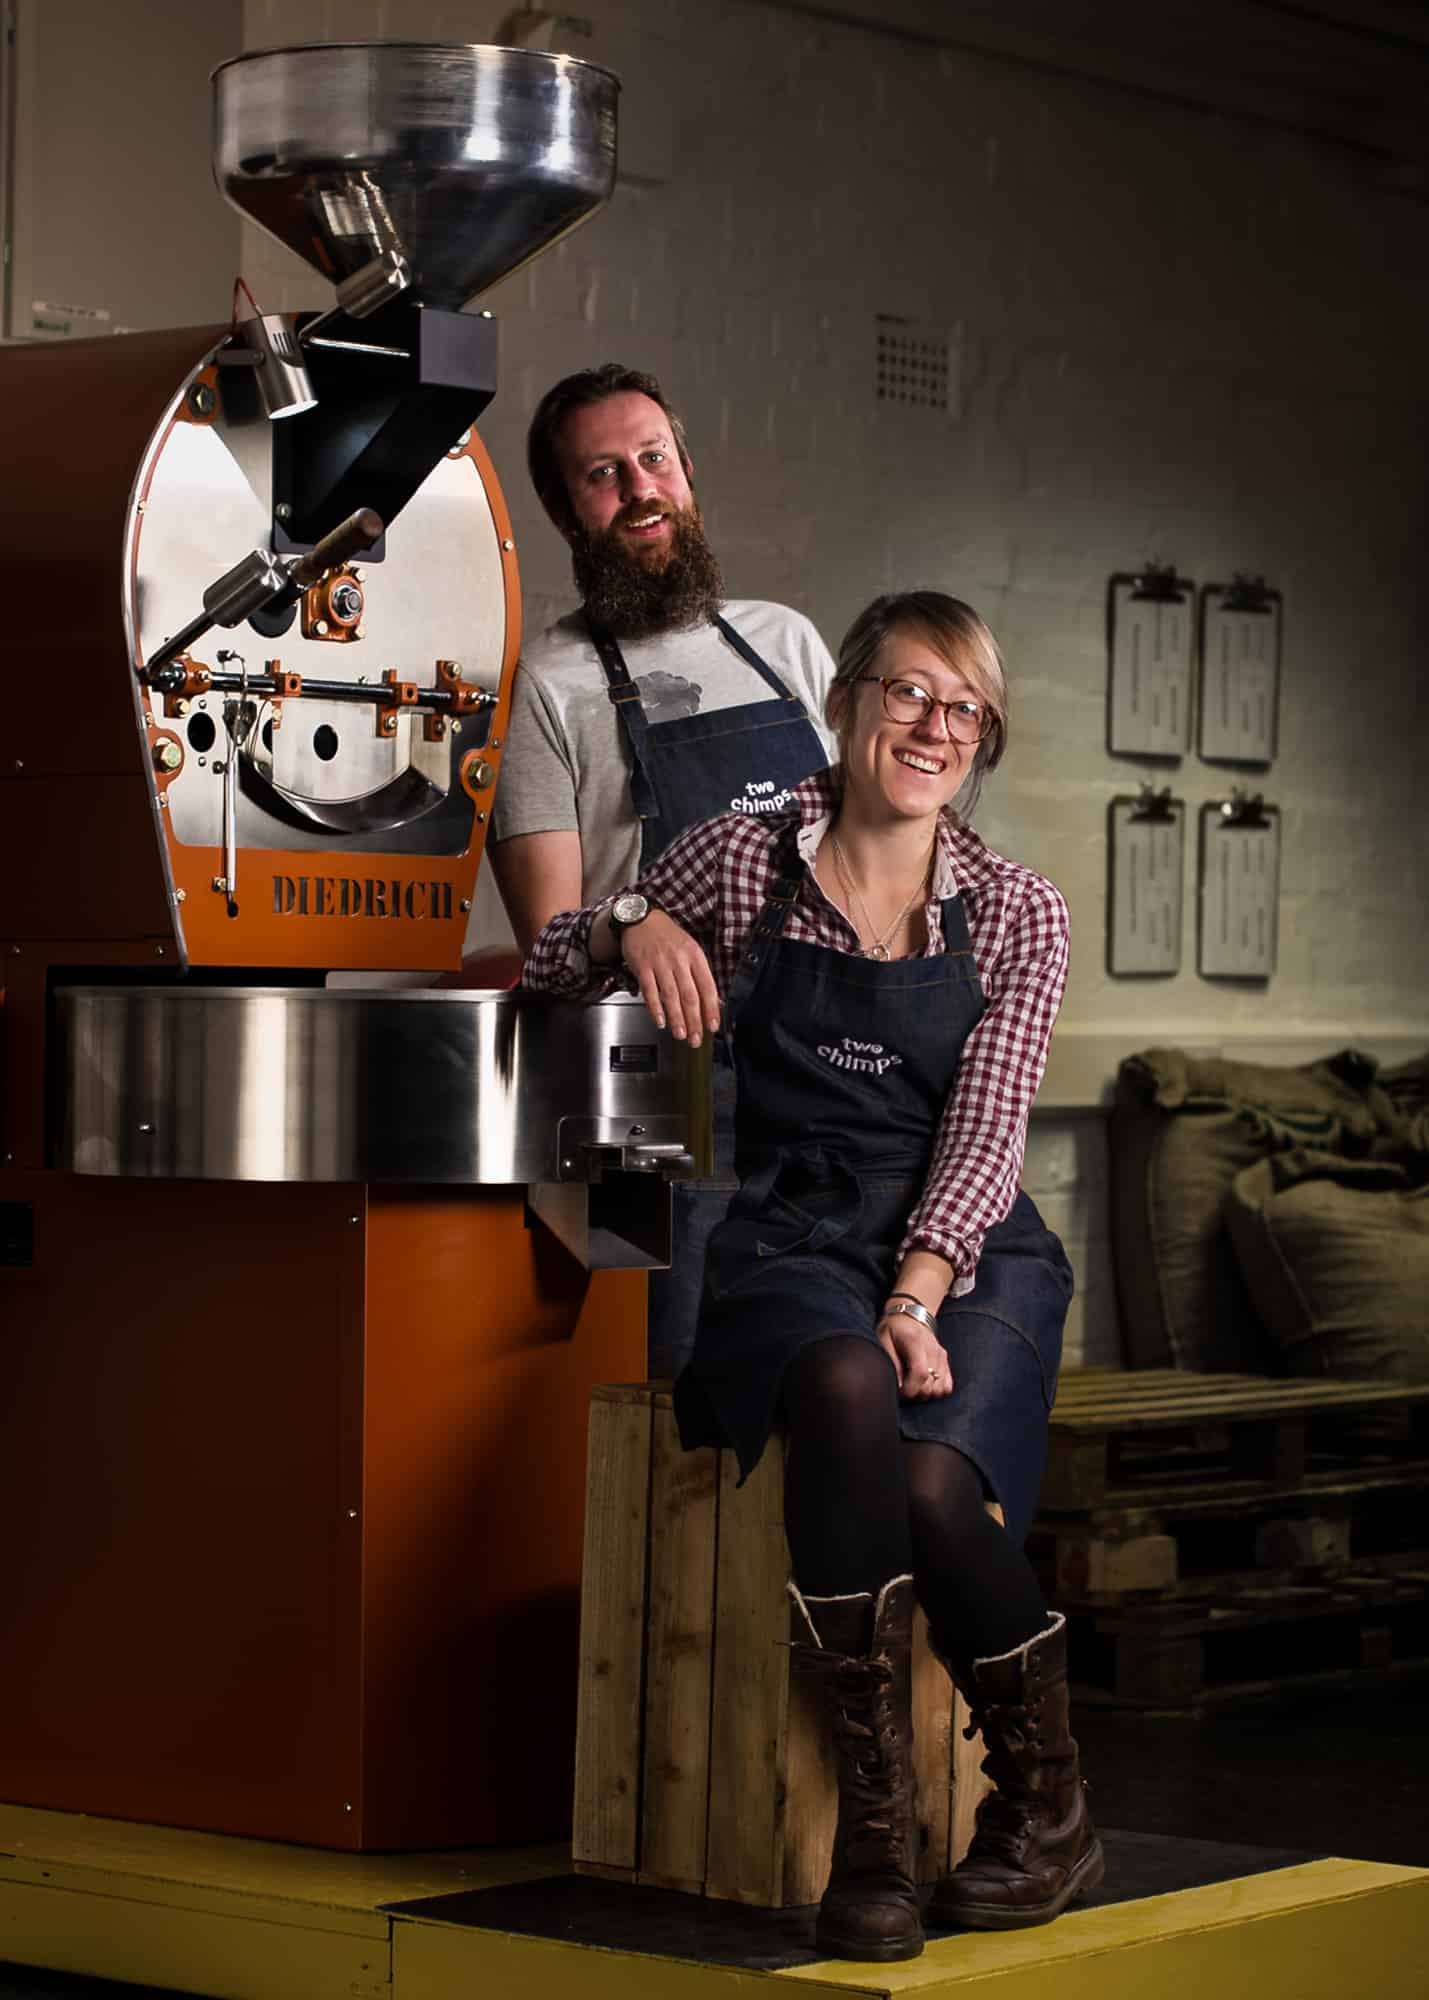 andy and laura the founders of two chimps coffee with their didrich coffee roaster